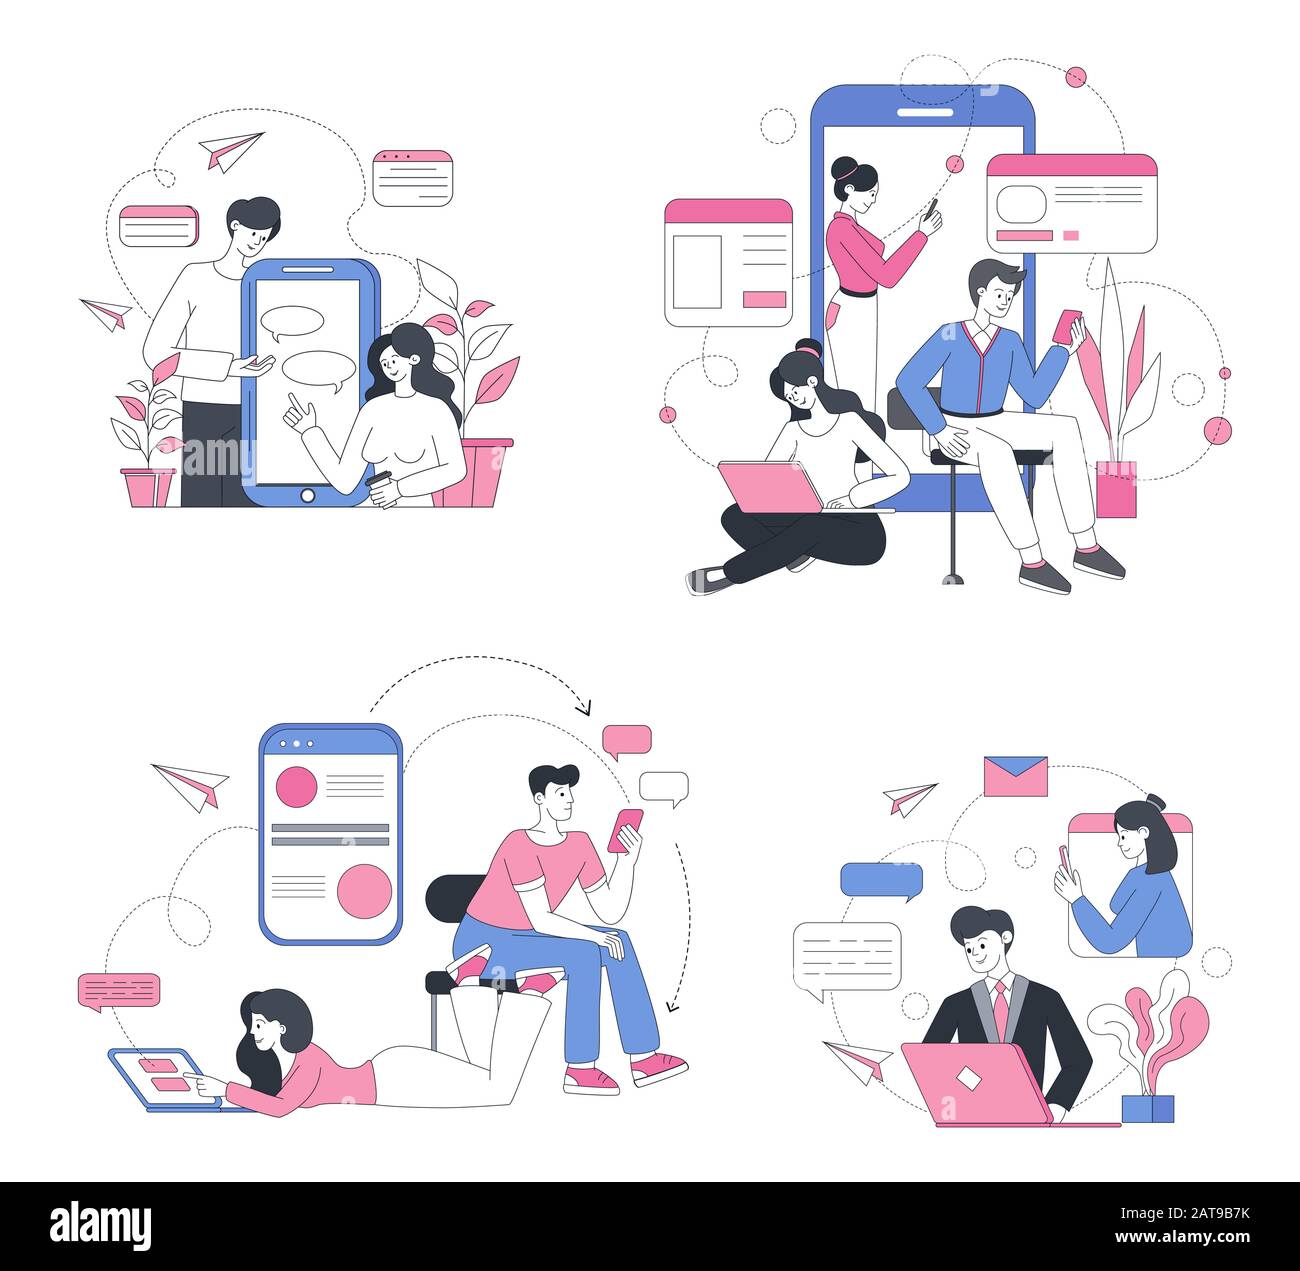 Online chatting outline vector concept illustrations. Social media modern communication, internet forum, messaging and sharing. People typing messages, networking lineart characters set Stock Vector